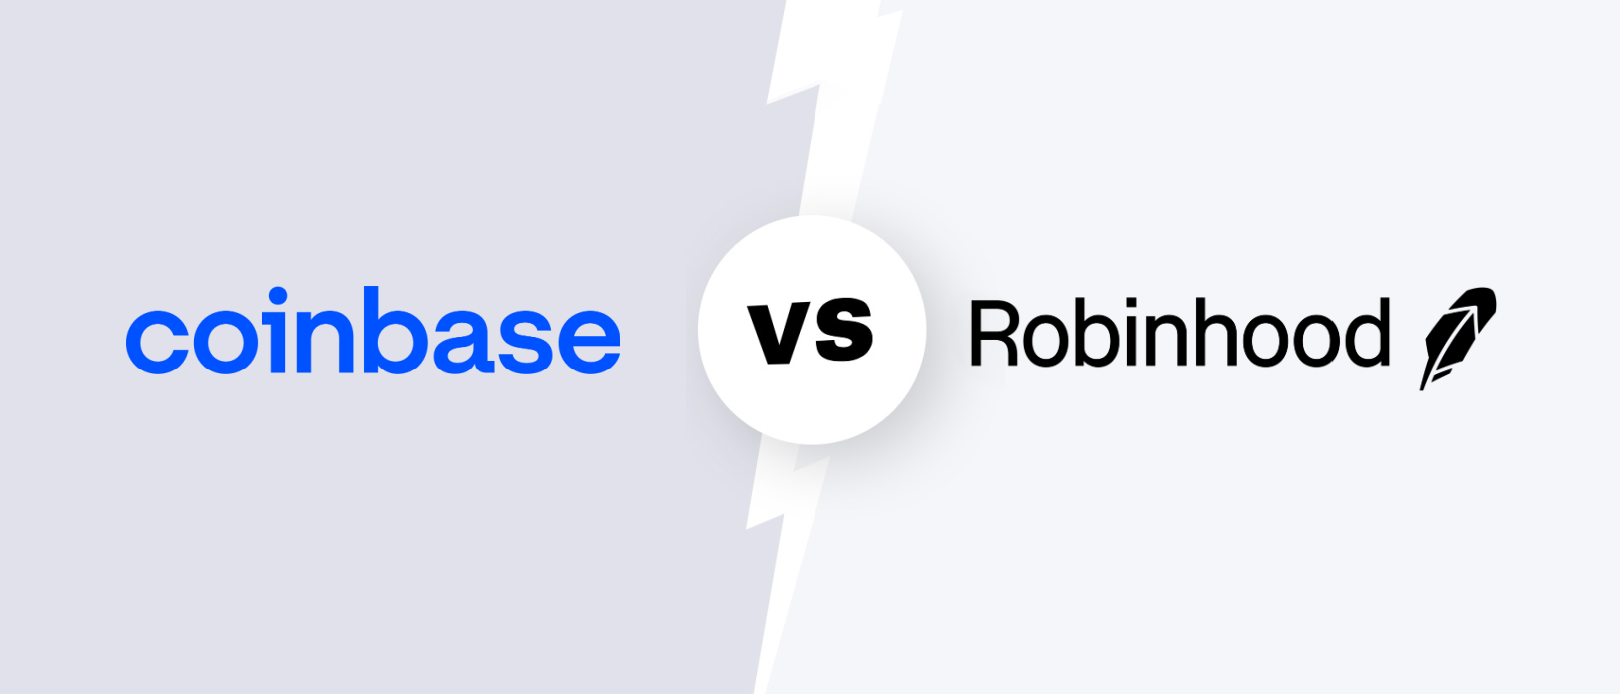 Robinhood Vs. Coinbase: Which Is Best?